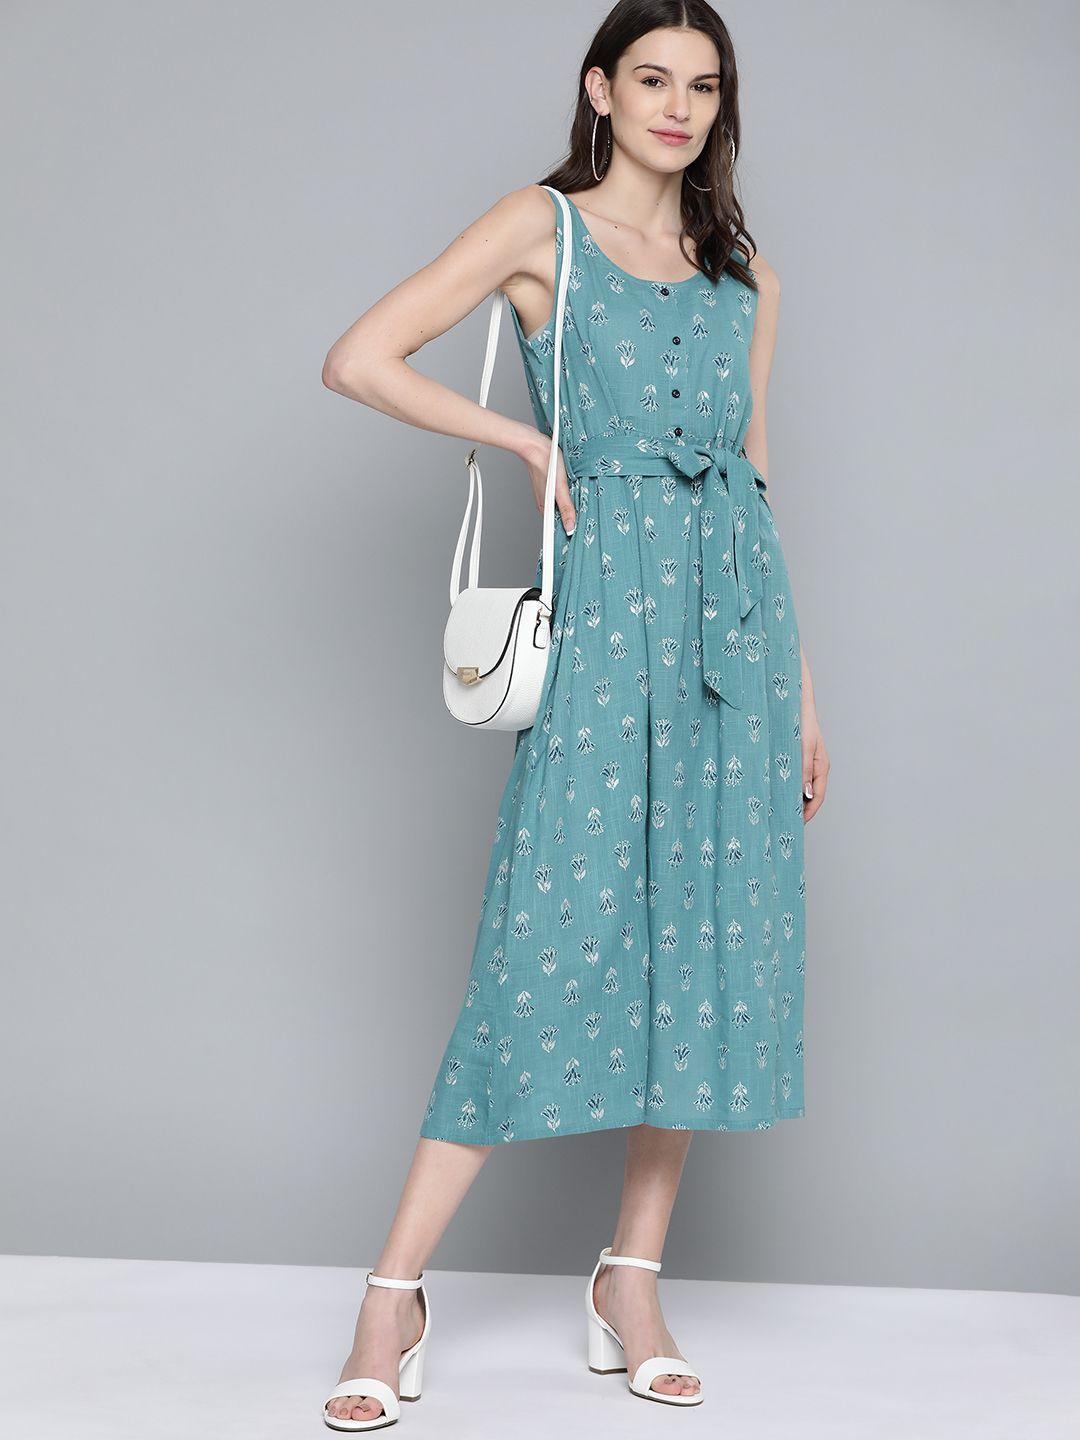 here&now green & navy blue ethnic motifs printed pure cotton a-line midi dress with belt